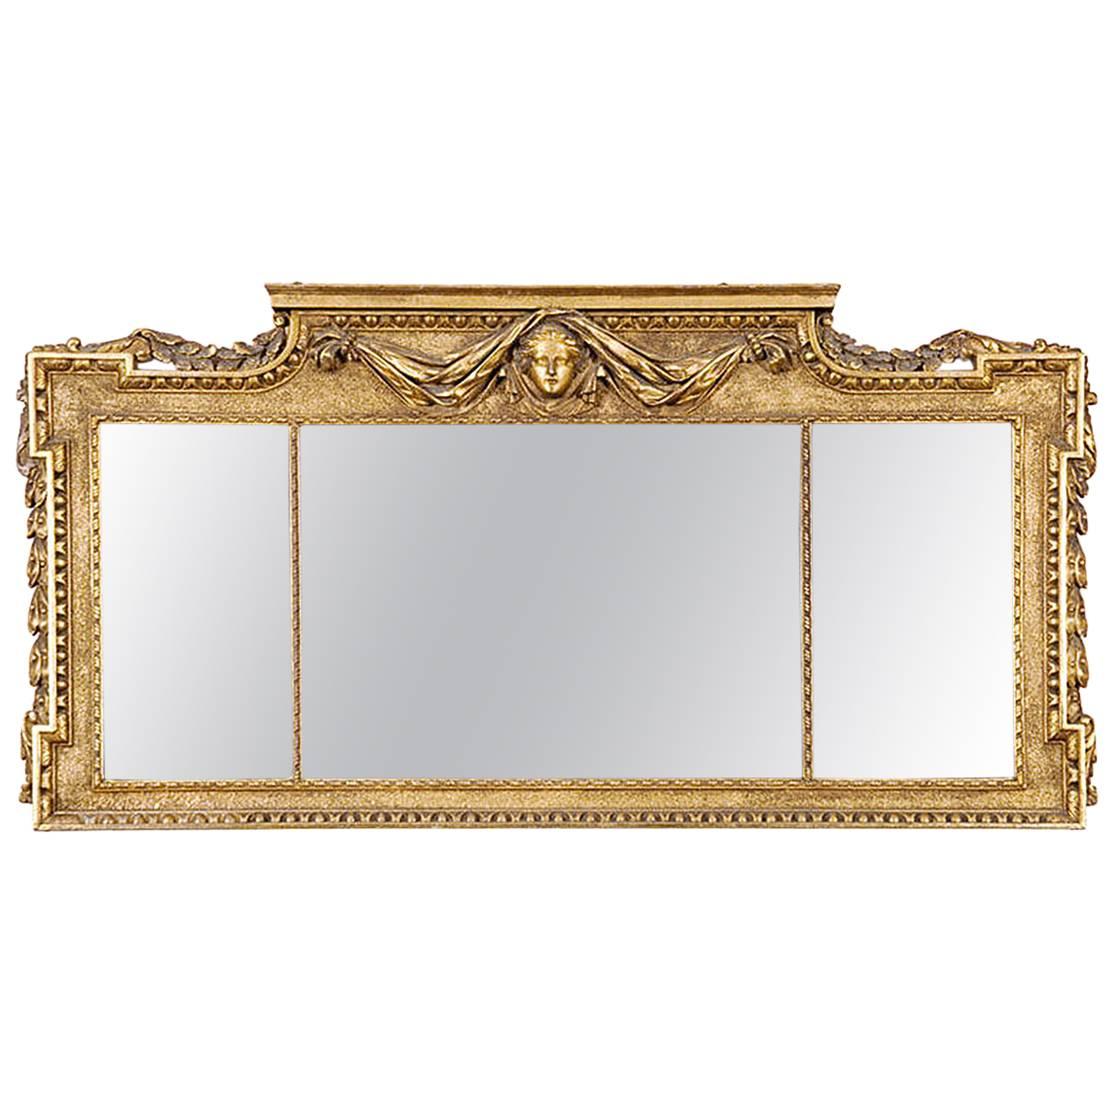 Early Victorian Gilt Overmantel Mirror